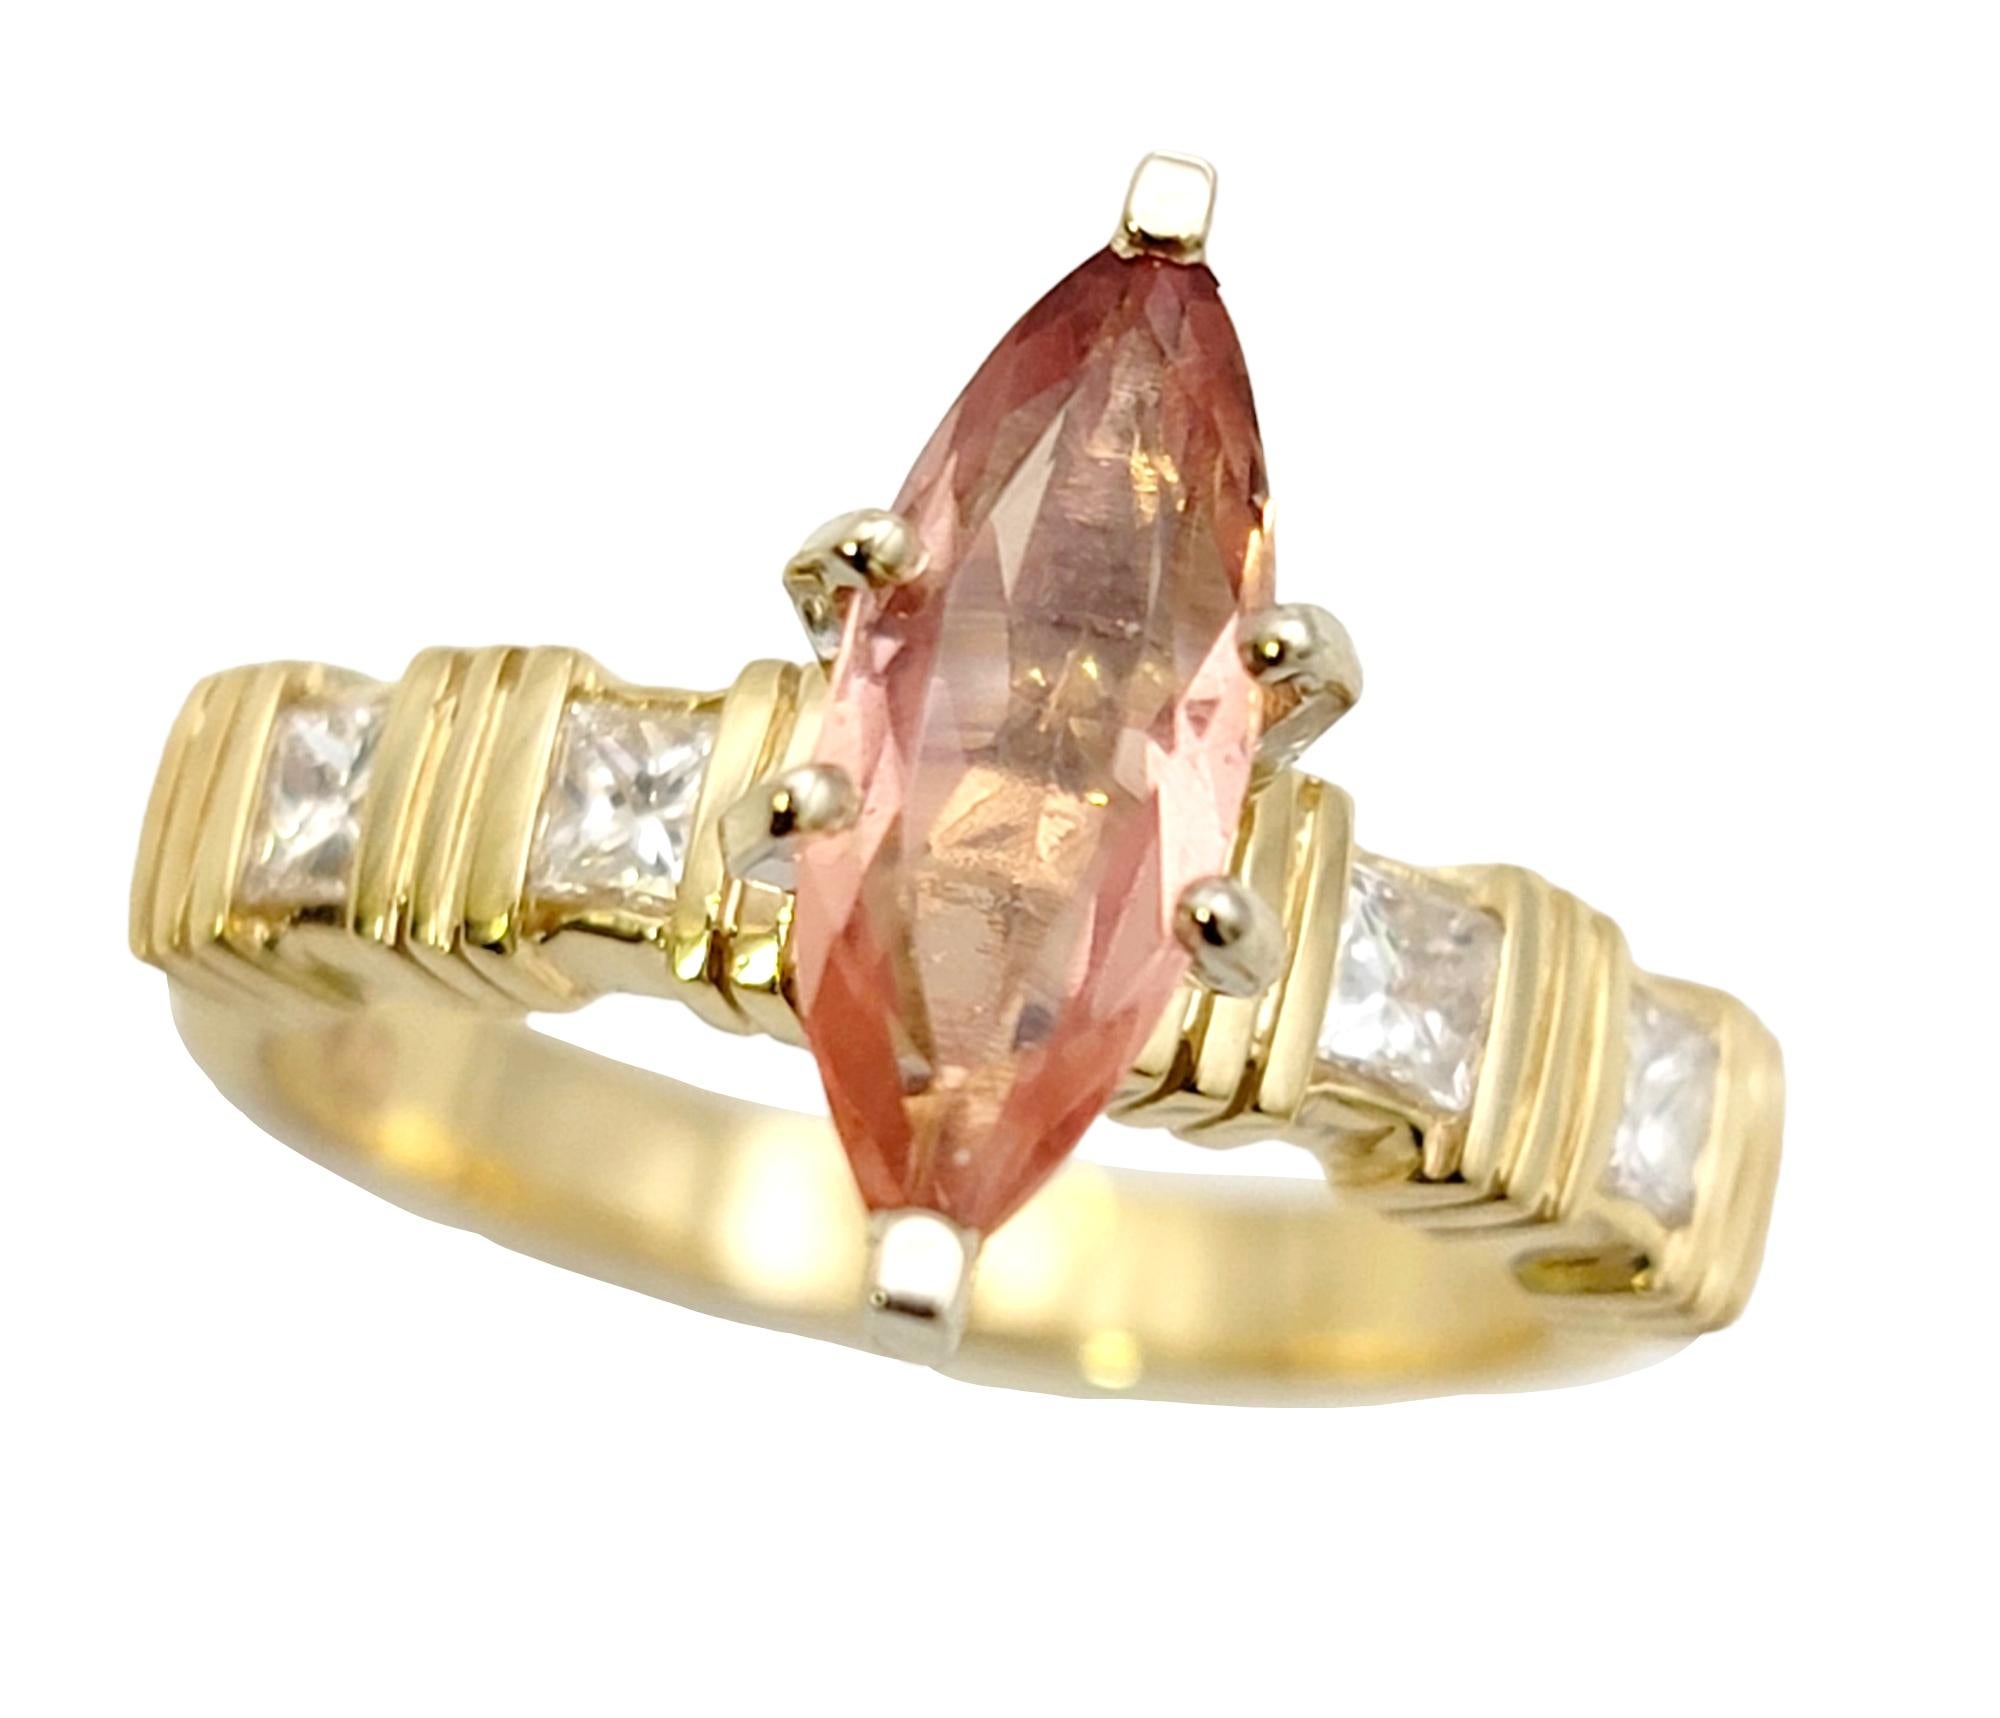 Ring size: 7

This understated yet elegant solitaire ring gives off a warm glow that will shine beautifully on the hand. The peachy orange tourmaline stone flatters and elongates the finger while the sparkling diamonds shine against the warm yellow